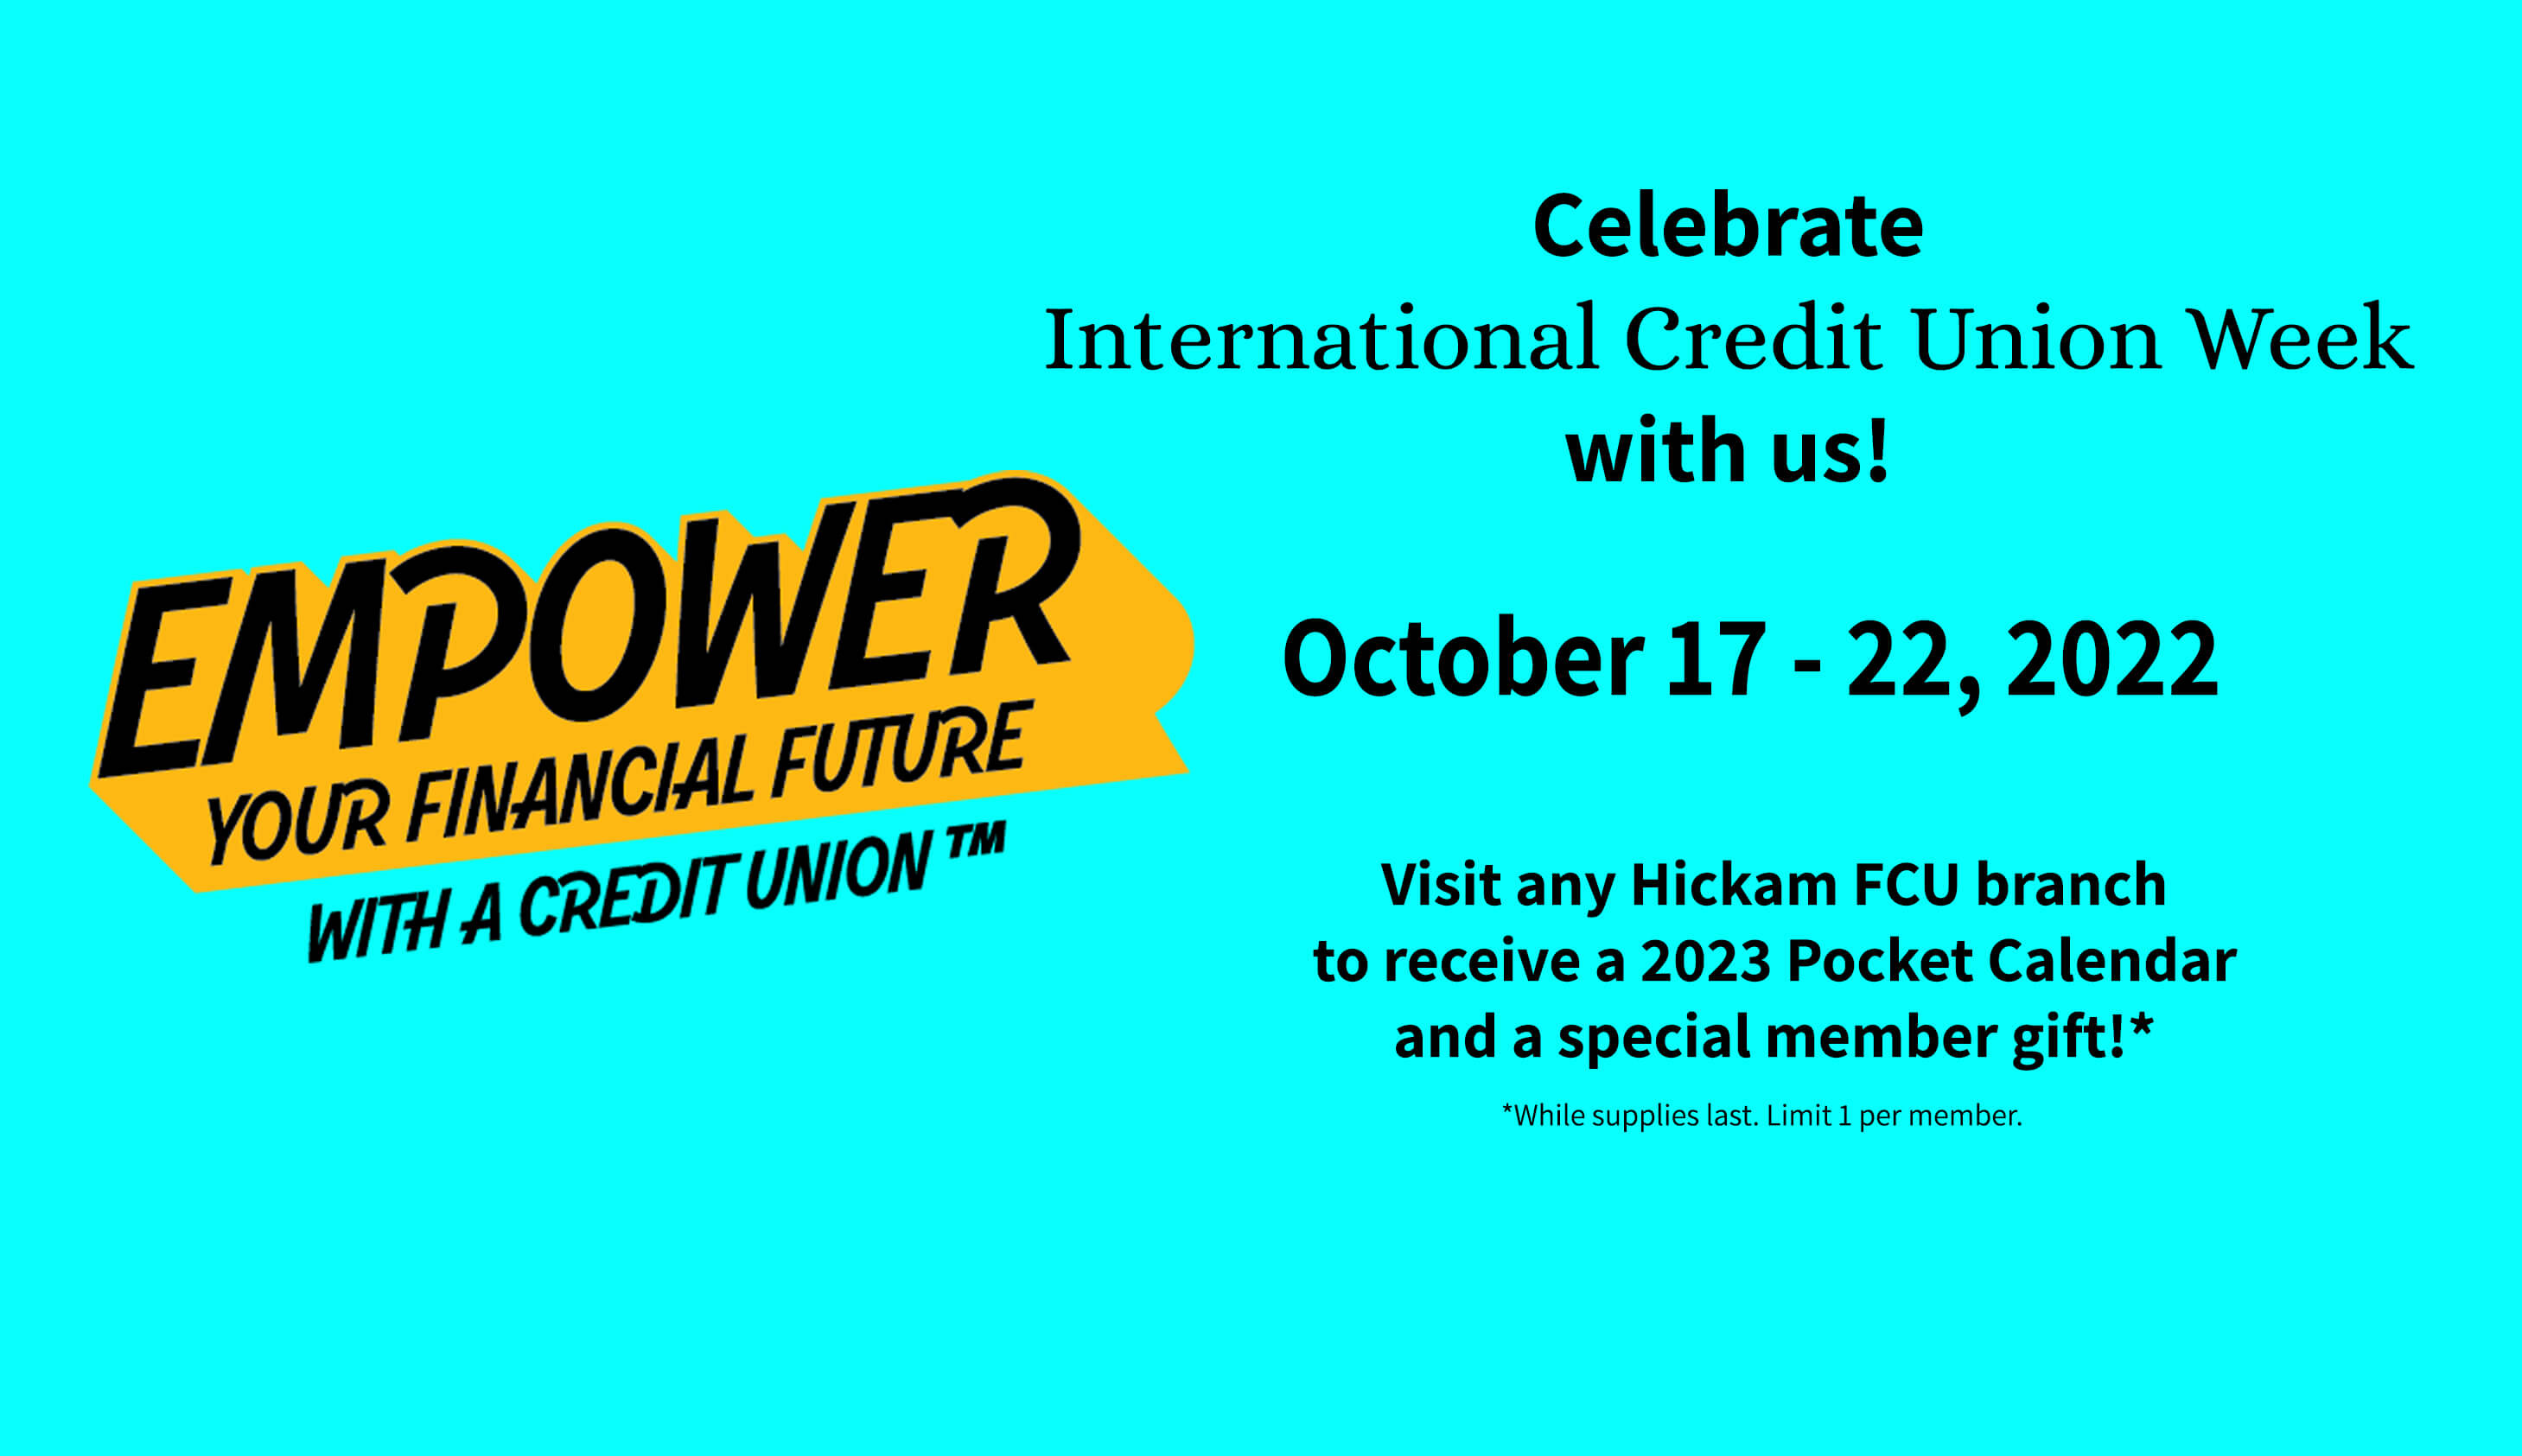 Celebrate International Credit Union Week with us. October 17 thru 22, 2022 visit any Hickam FCU branch to receive a 2023 Pocket Calendar and a special  member gift. While supplies last. Limit 1 per member.